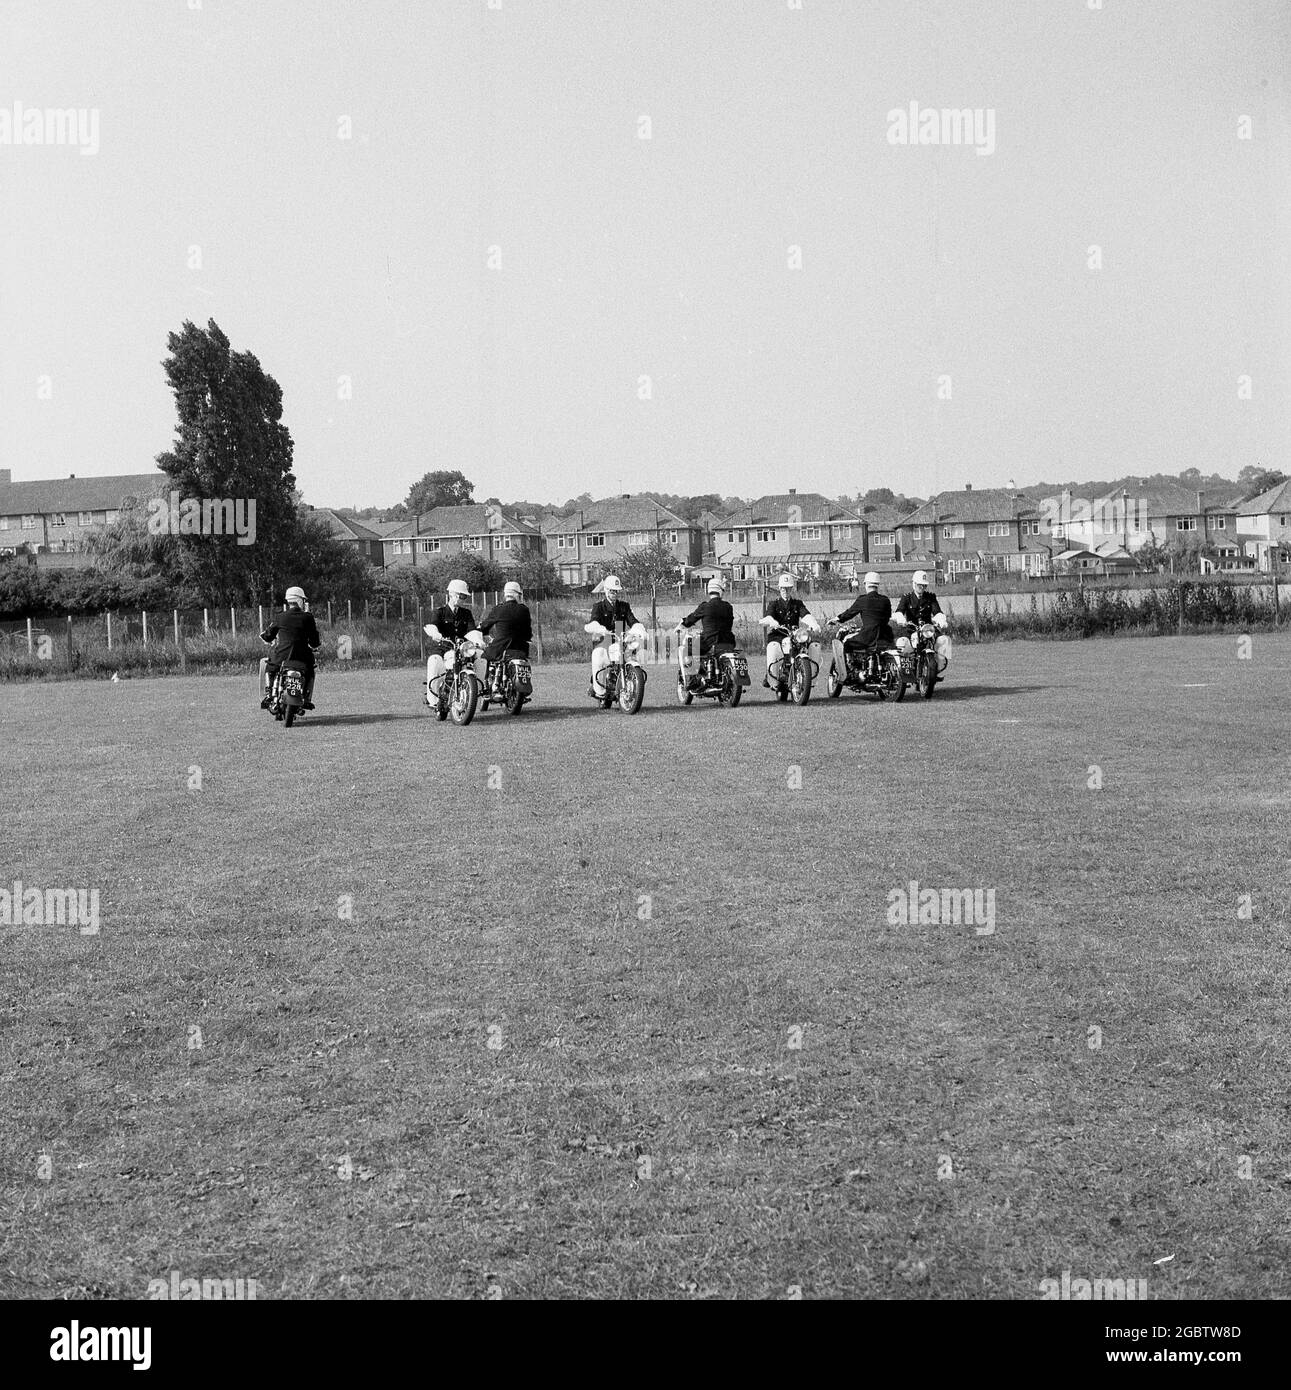 1969, historical, a motorcycle display team doing a demonstration at Raphael Park, Romford, Havering, Essex, UK. Opened in 1904, the land for the public park was a gifted to the people of Romford by Sir Herbert Raphael MP, who it was named after. Stock Photo